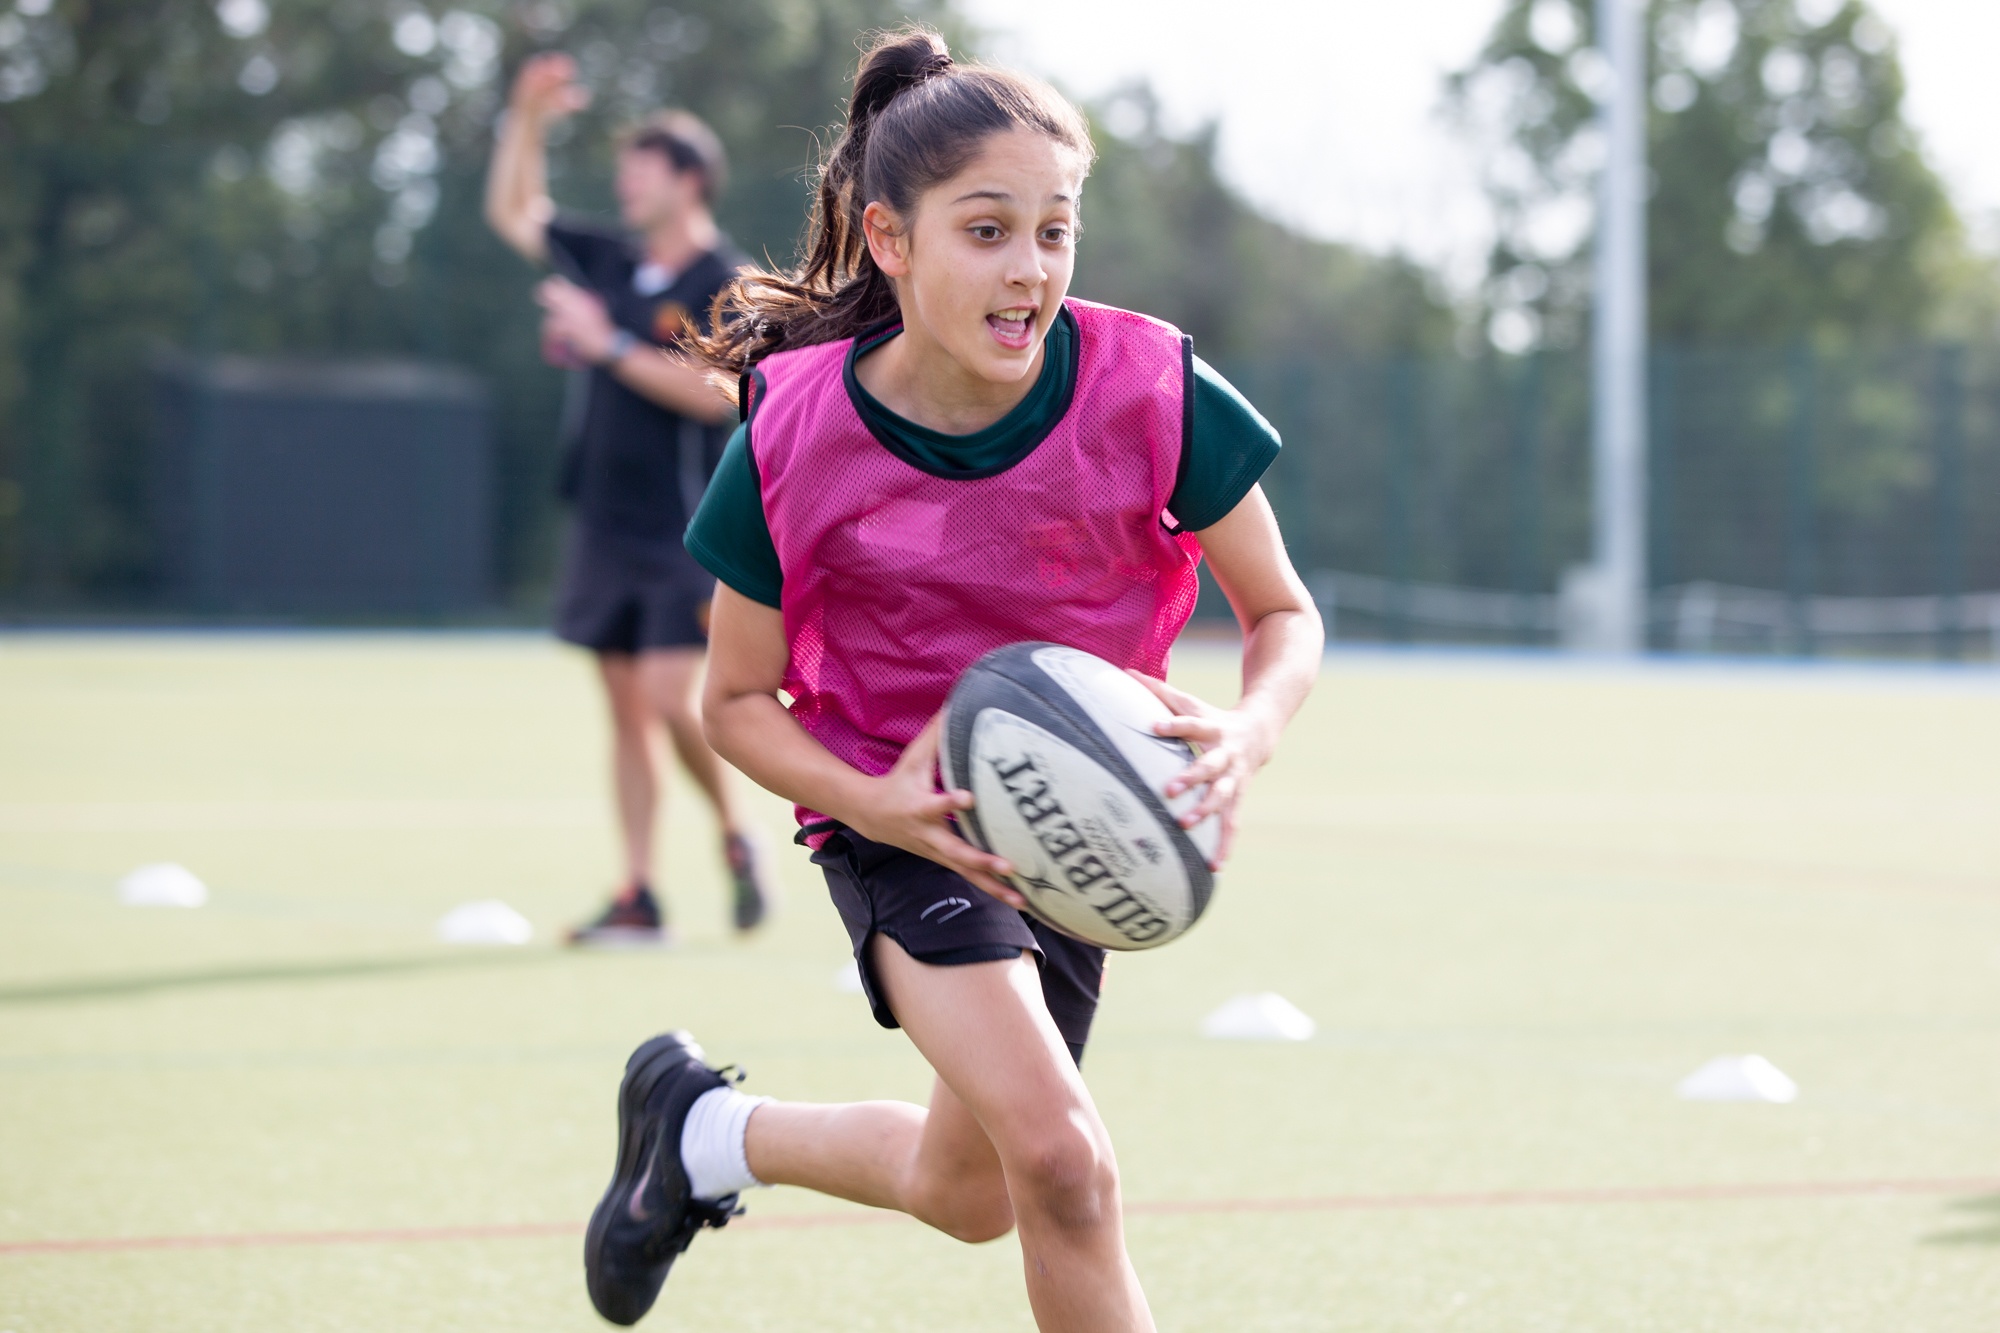 Girl playing rugby